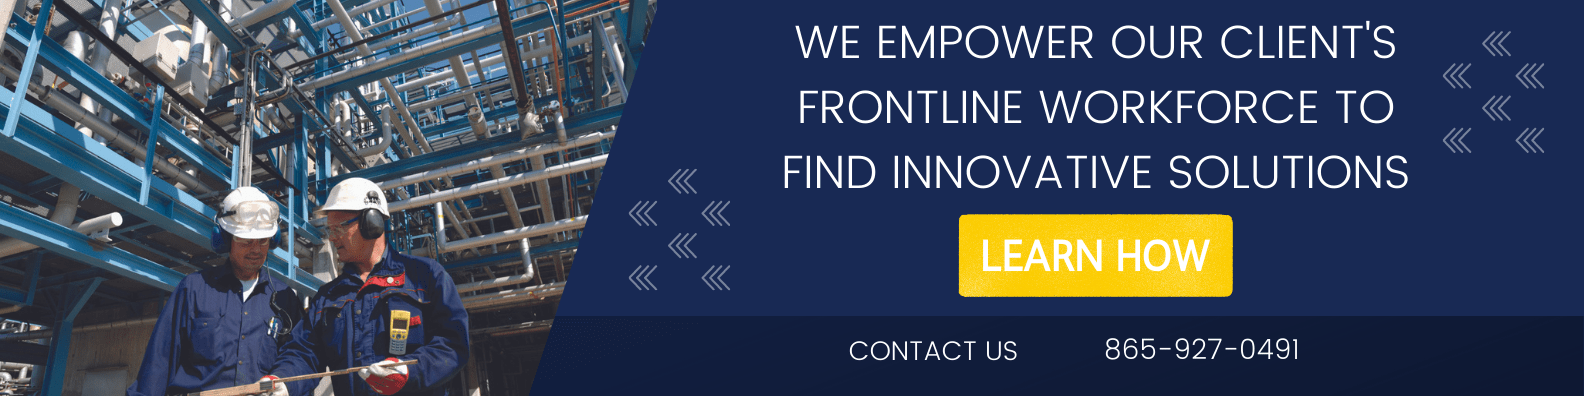 Learn how we empower our client's frontline workforce to find innovative solutions.